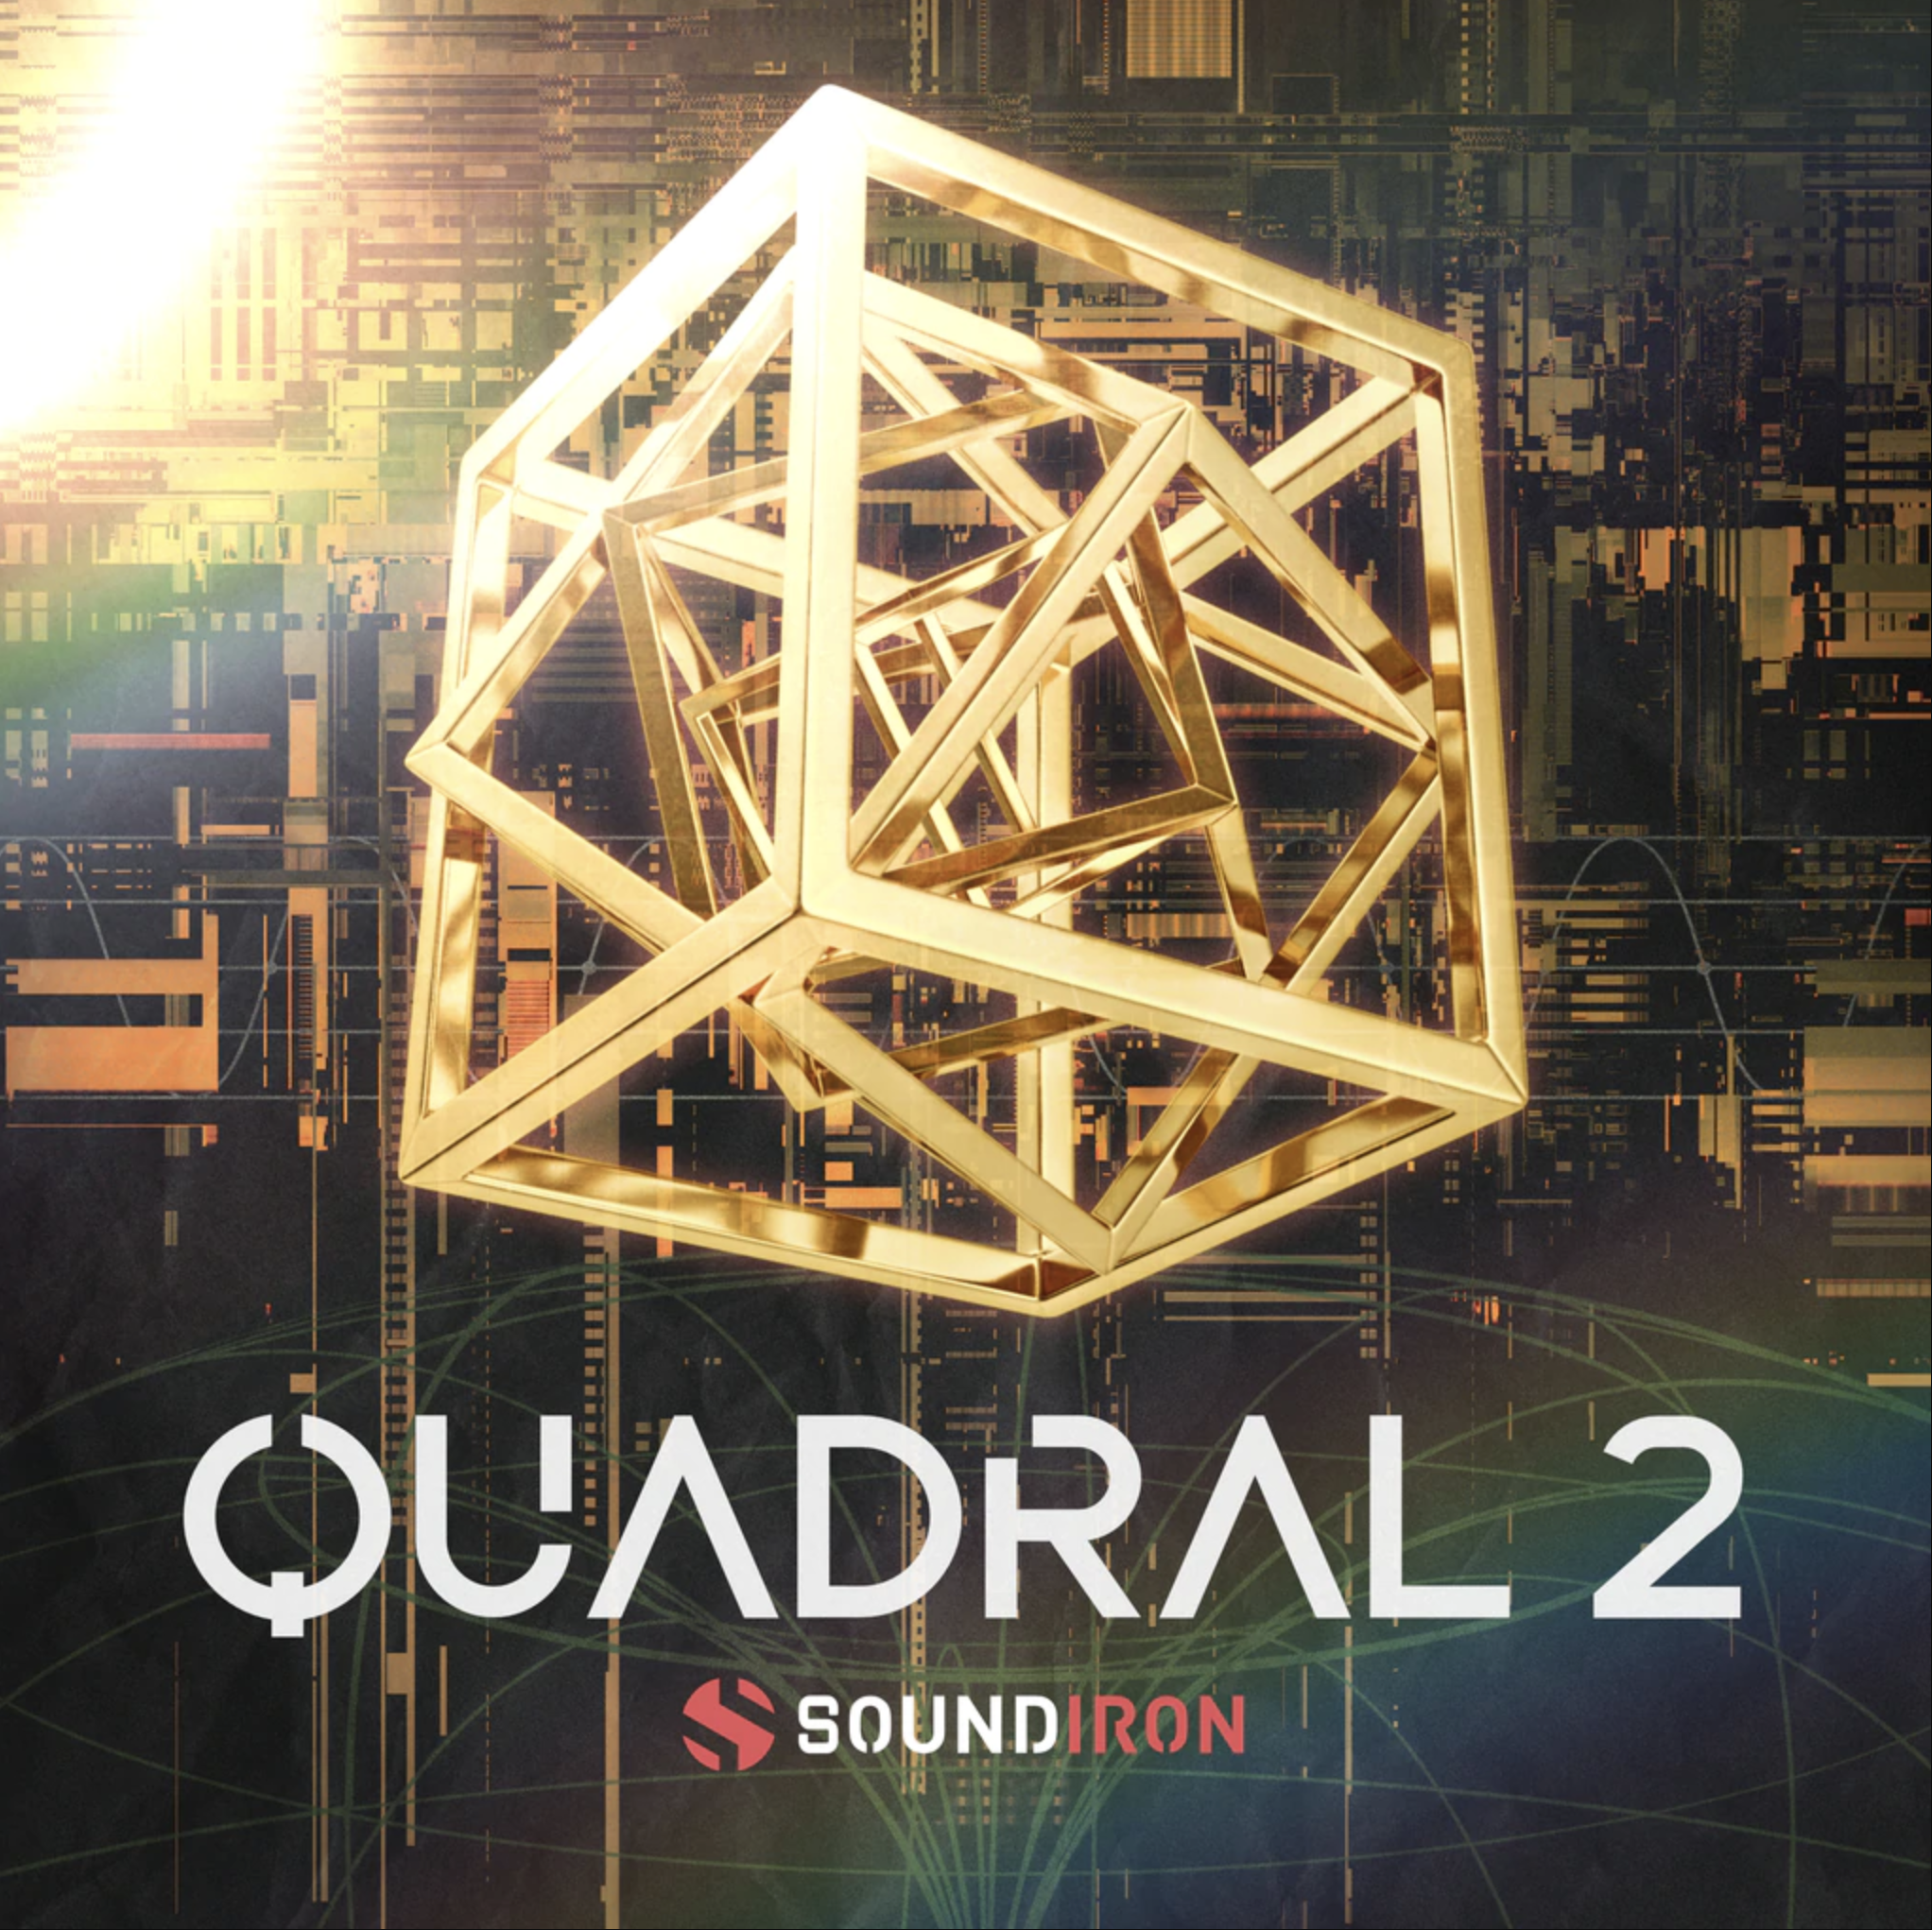 Quadral 2 by Soundiron A New Imagination Laboratory for Electronic Scores